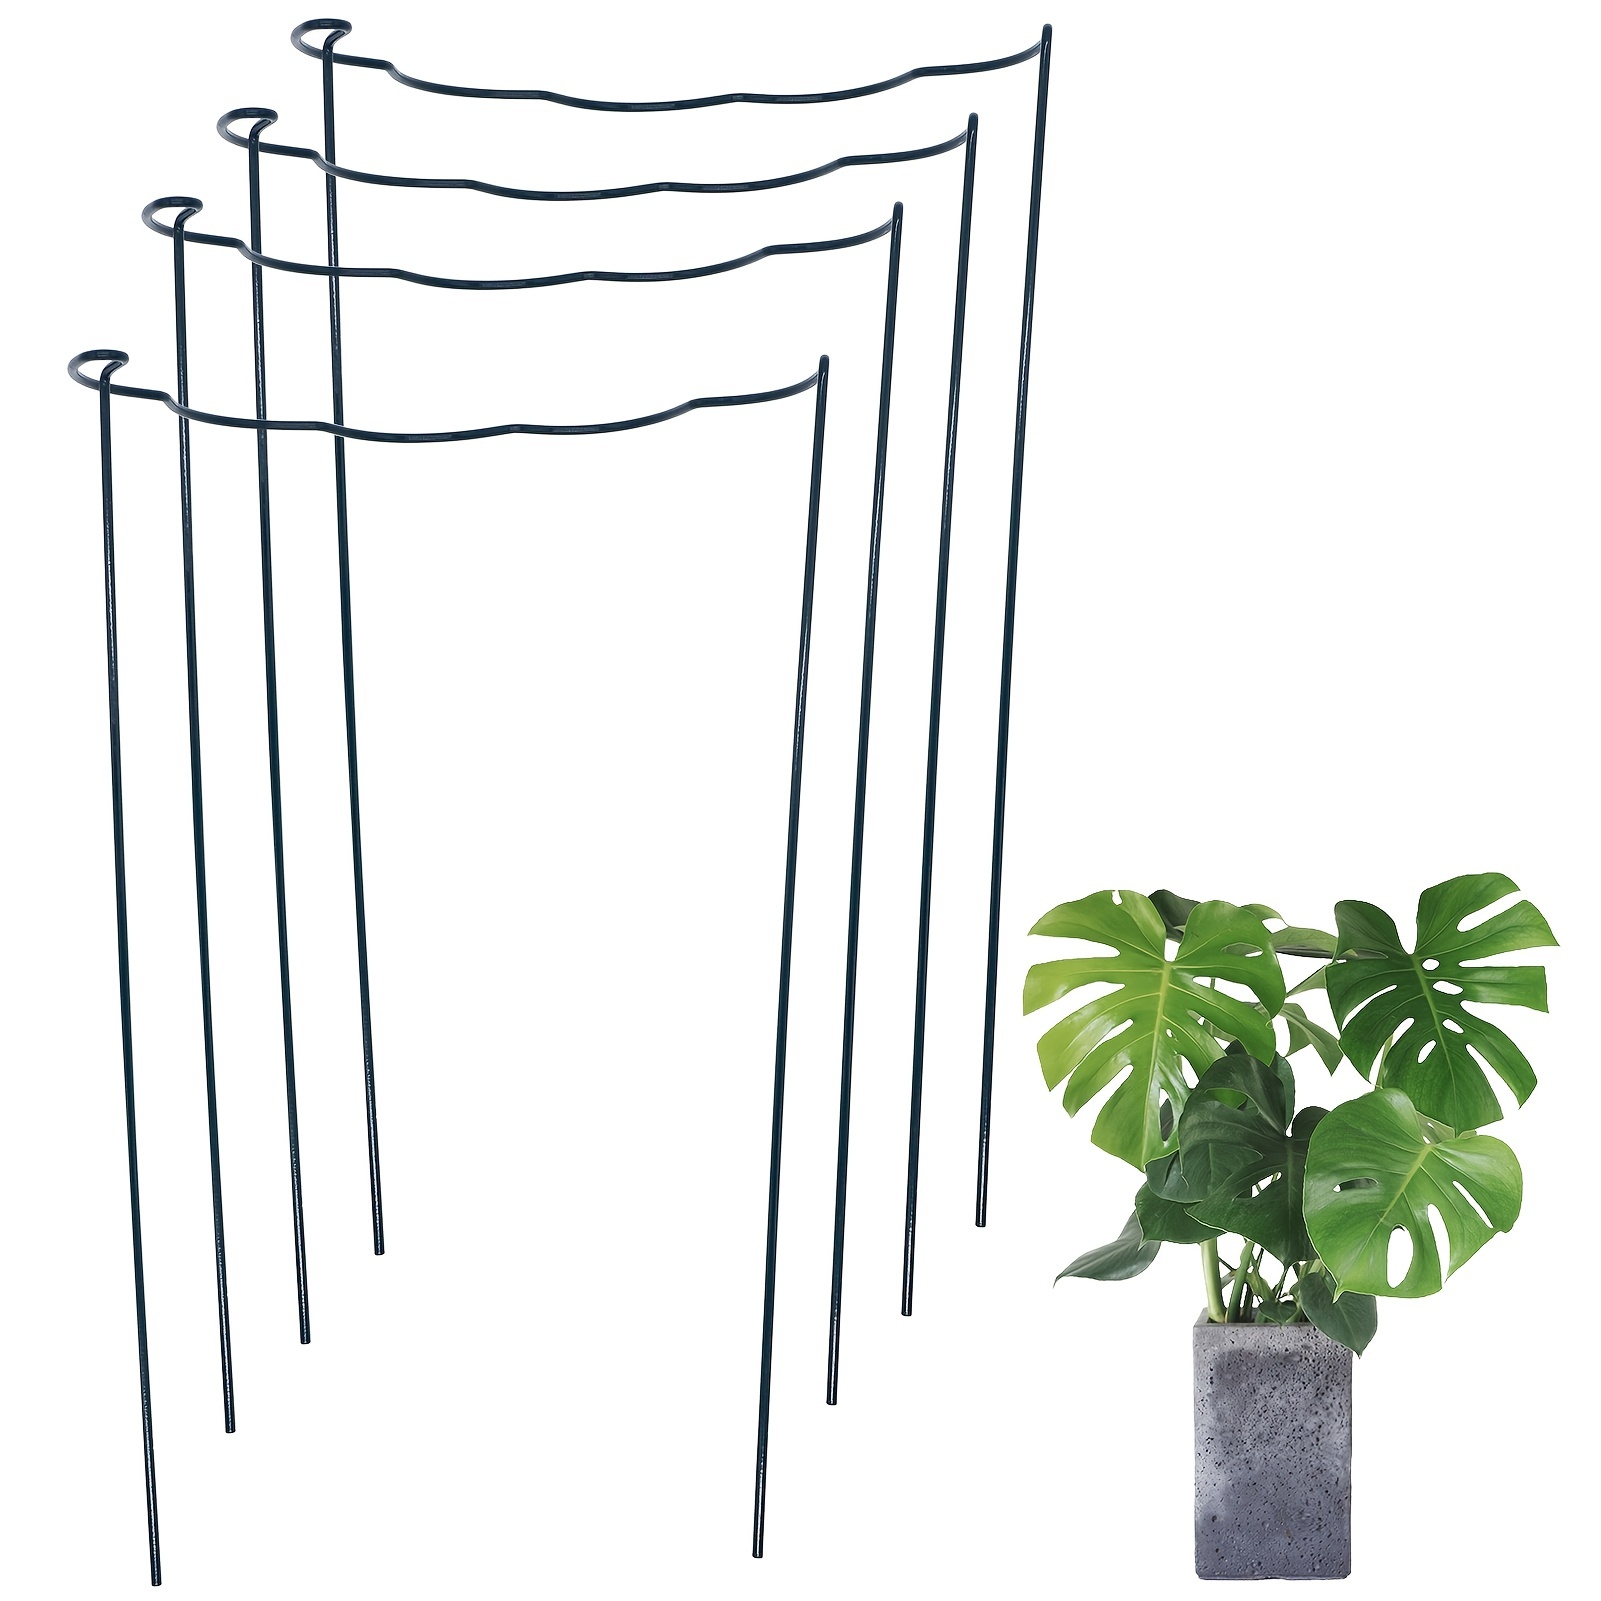 4 packs plant support stakes semi wavy metal garden plant support outdoor plant support ring cage plant support stakes for tomatoes roses vines indoor plants 7 8 x13 7 9 8 x15 7